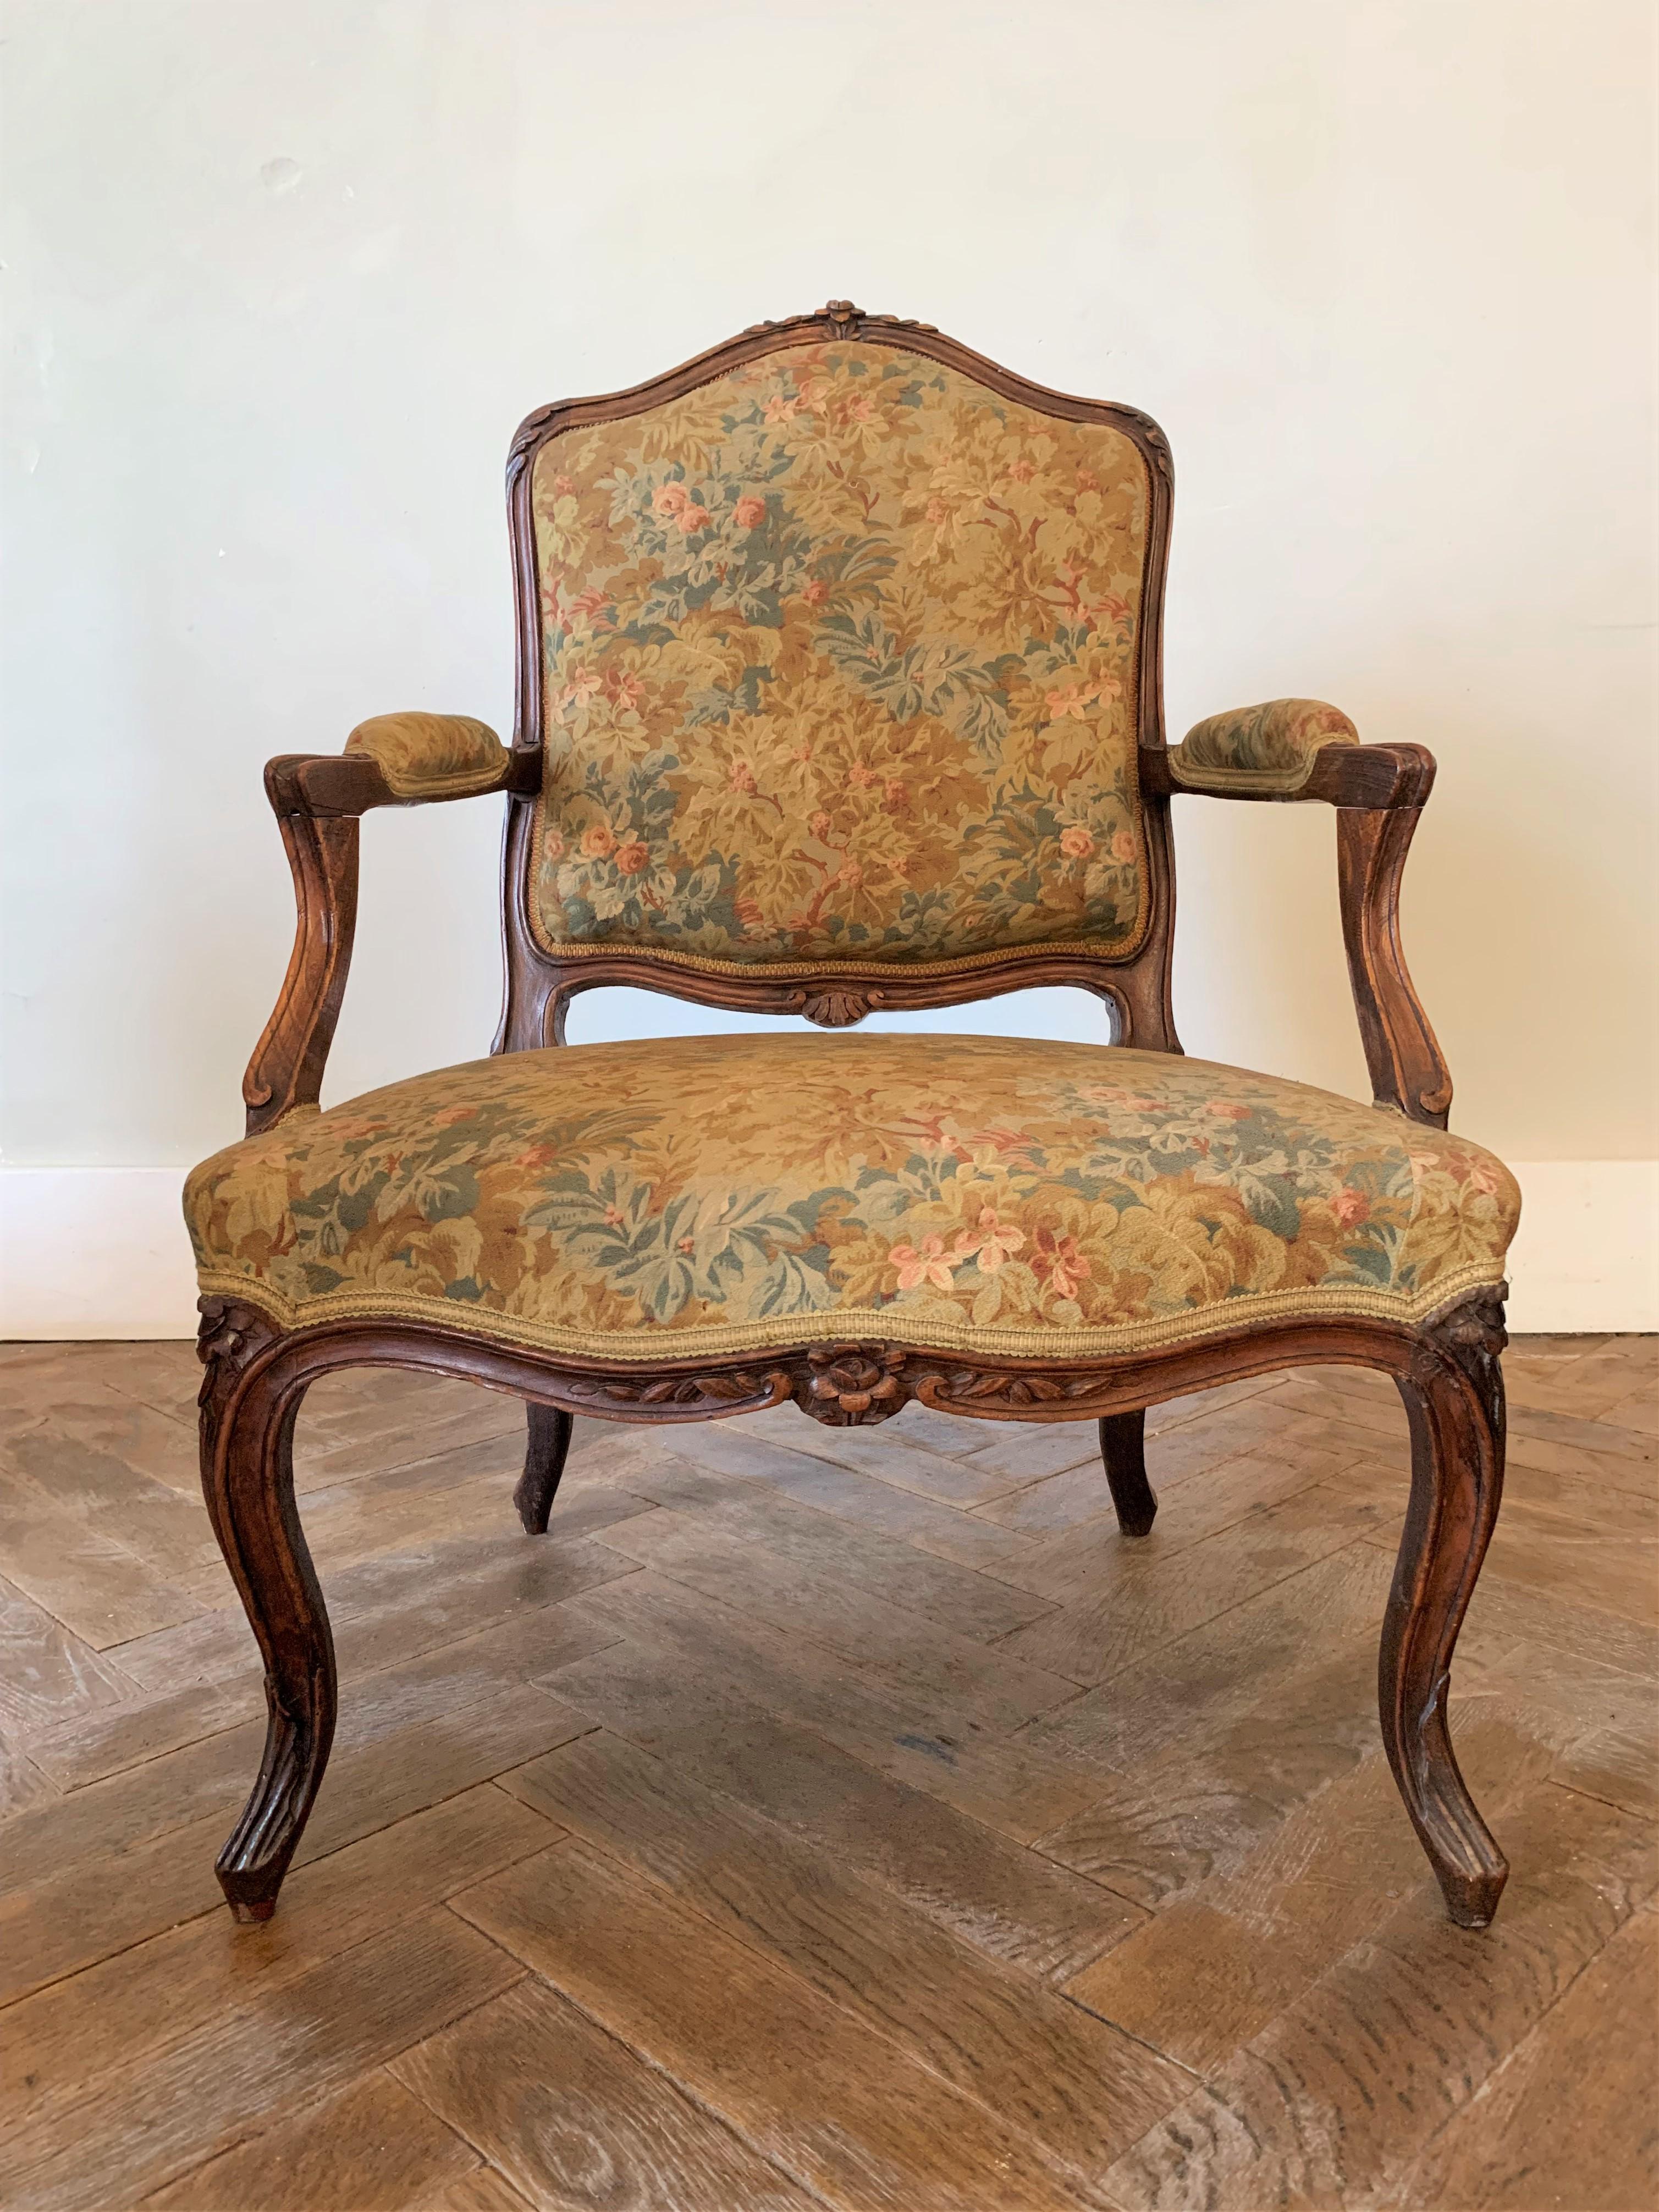 Magnificent Louis XV style Queen's armchair, richly carved with shells on the front of the seat and floral motifs on the curved legs. The finesse of the sculptures present elegant proportions which make the charm of this beautiful armchair.